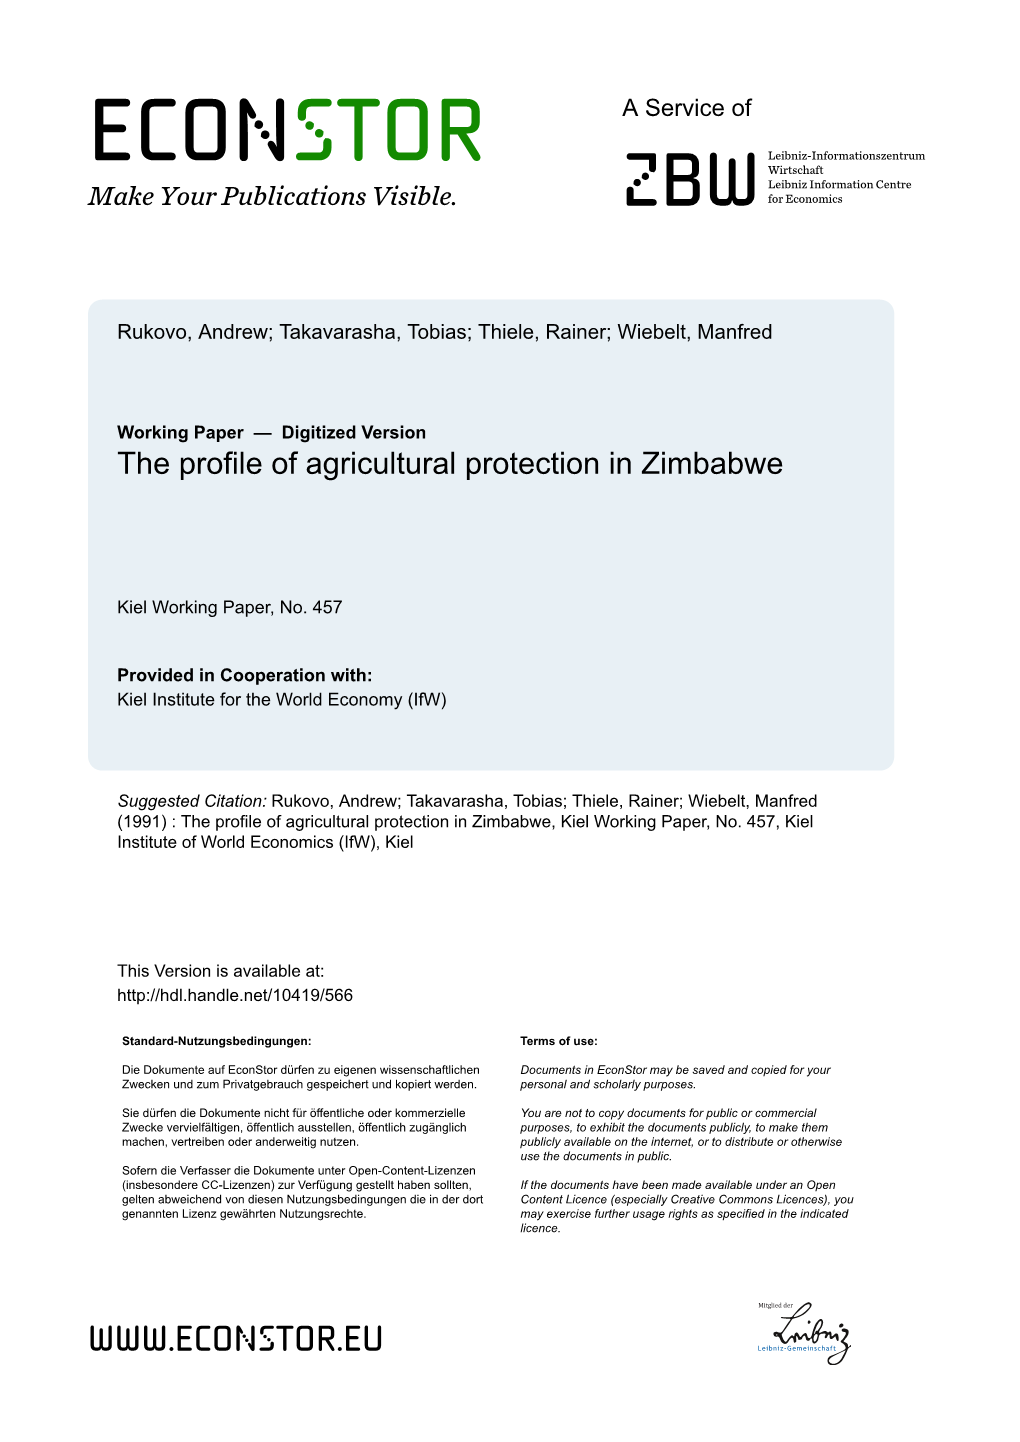 The Profile of Agricultural Protection in Zimbabwe